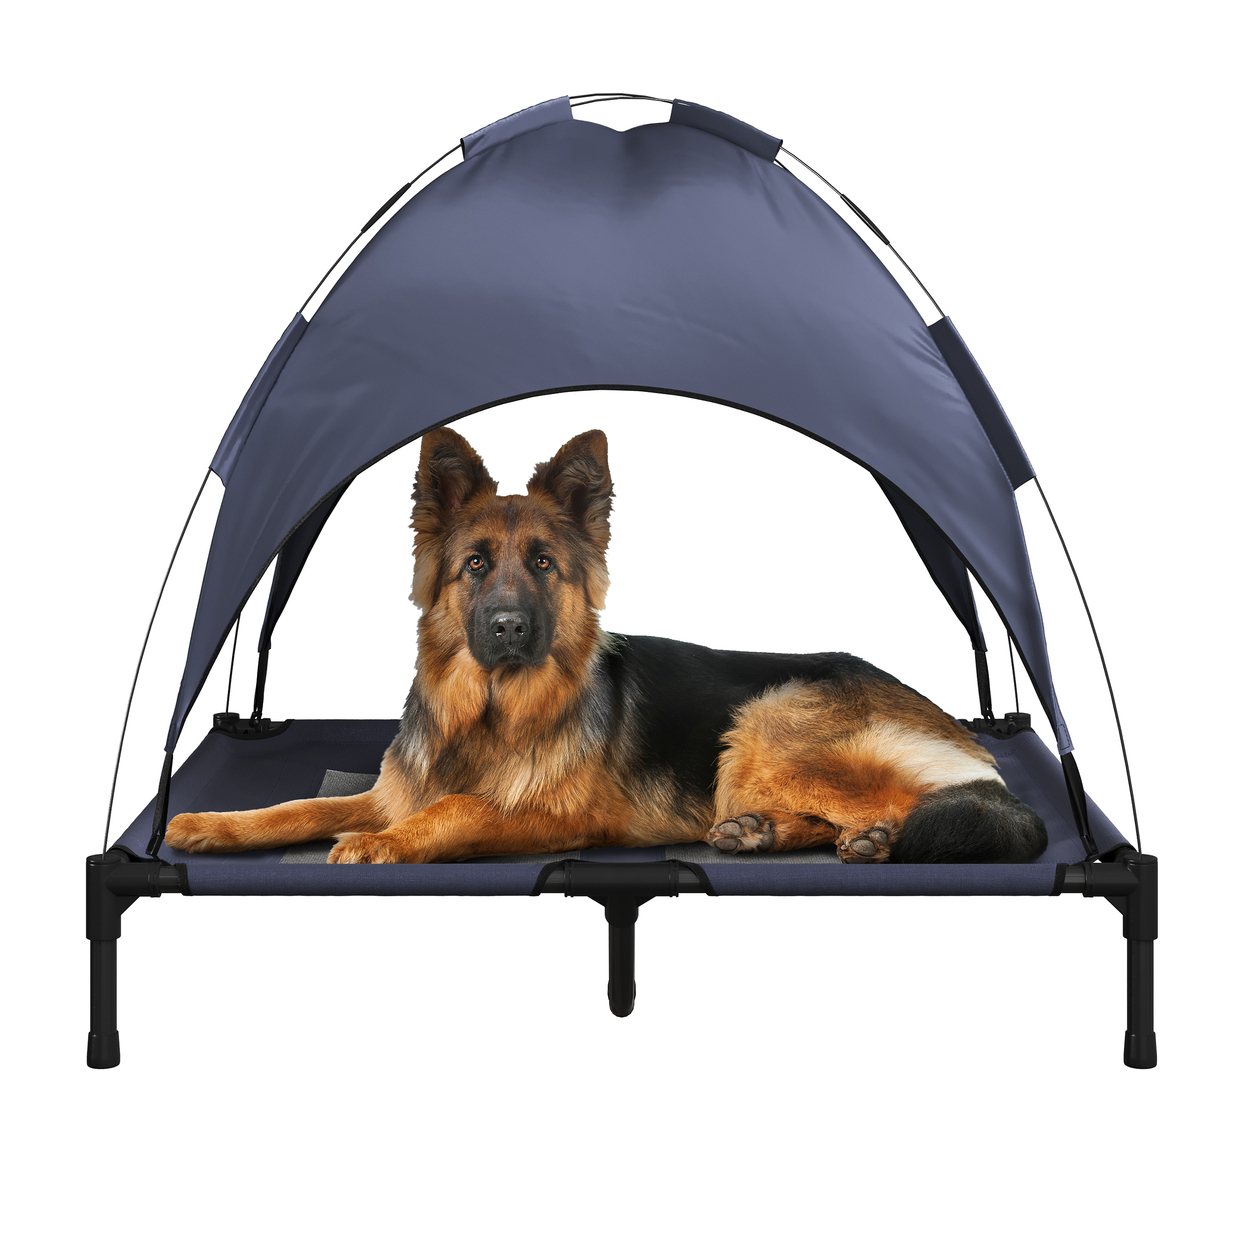 Elevated Dog Bed Canopy 36x30in Pet Bed Indoor/Outdoor Carrying Case, Blue